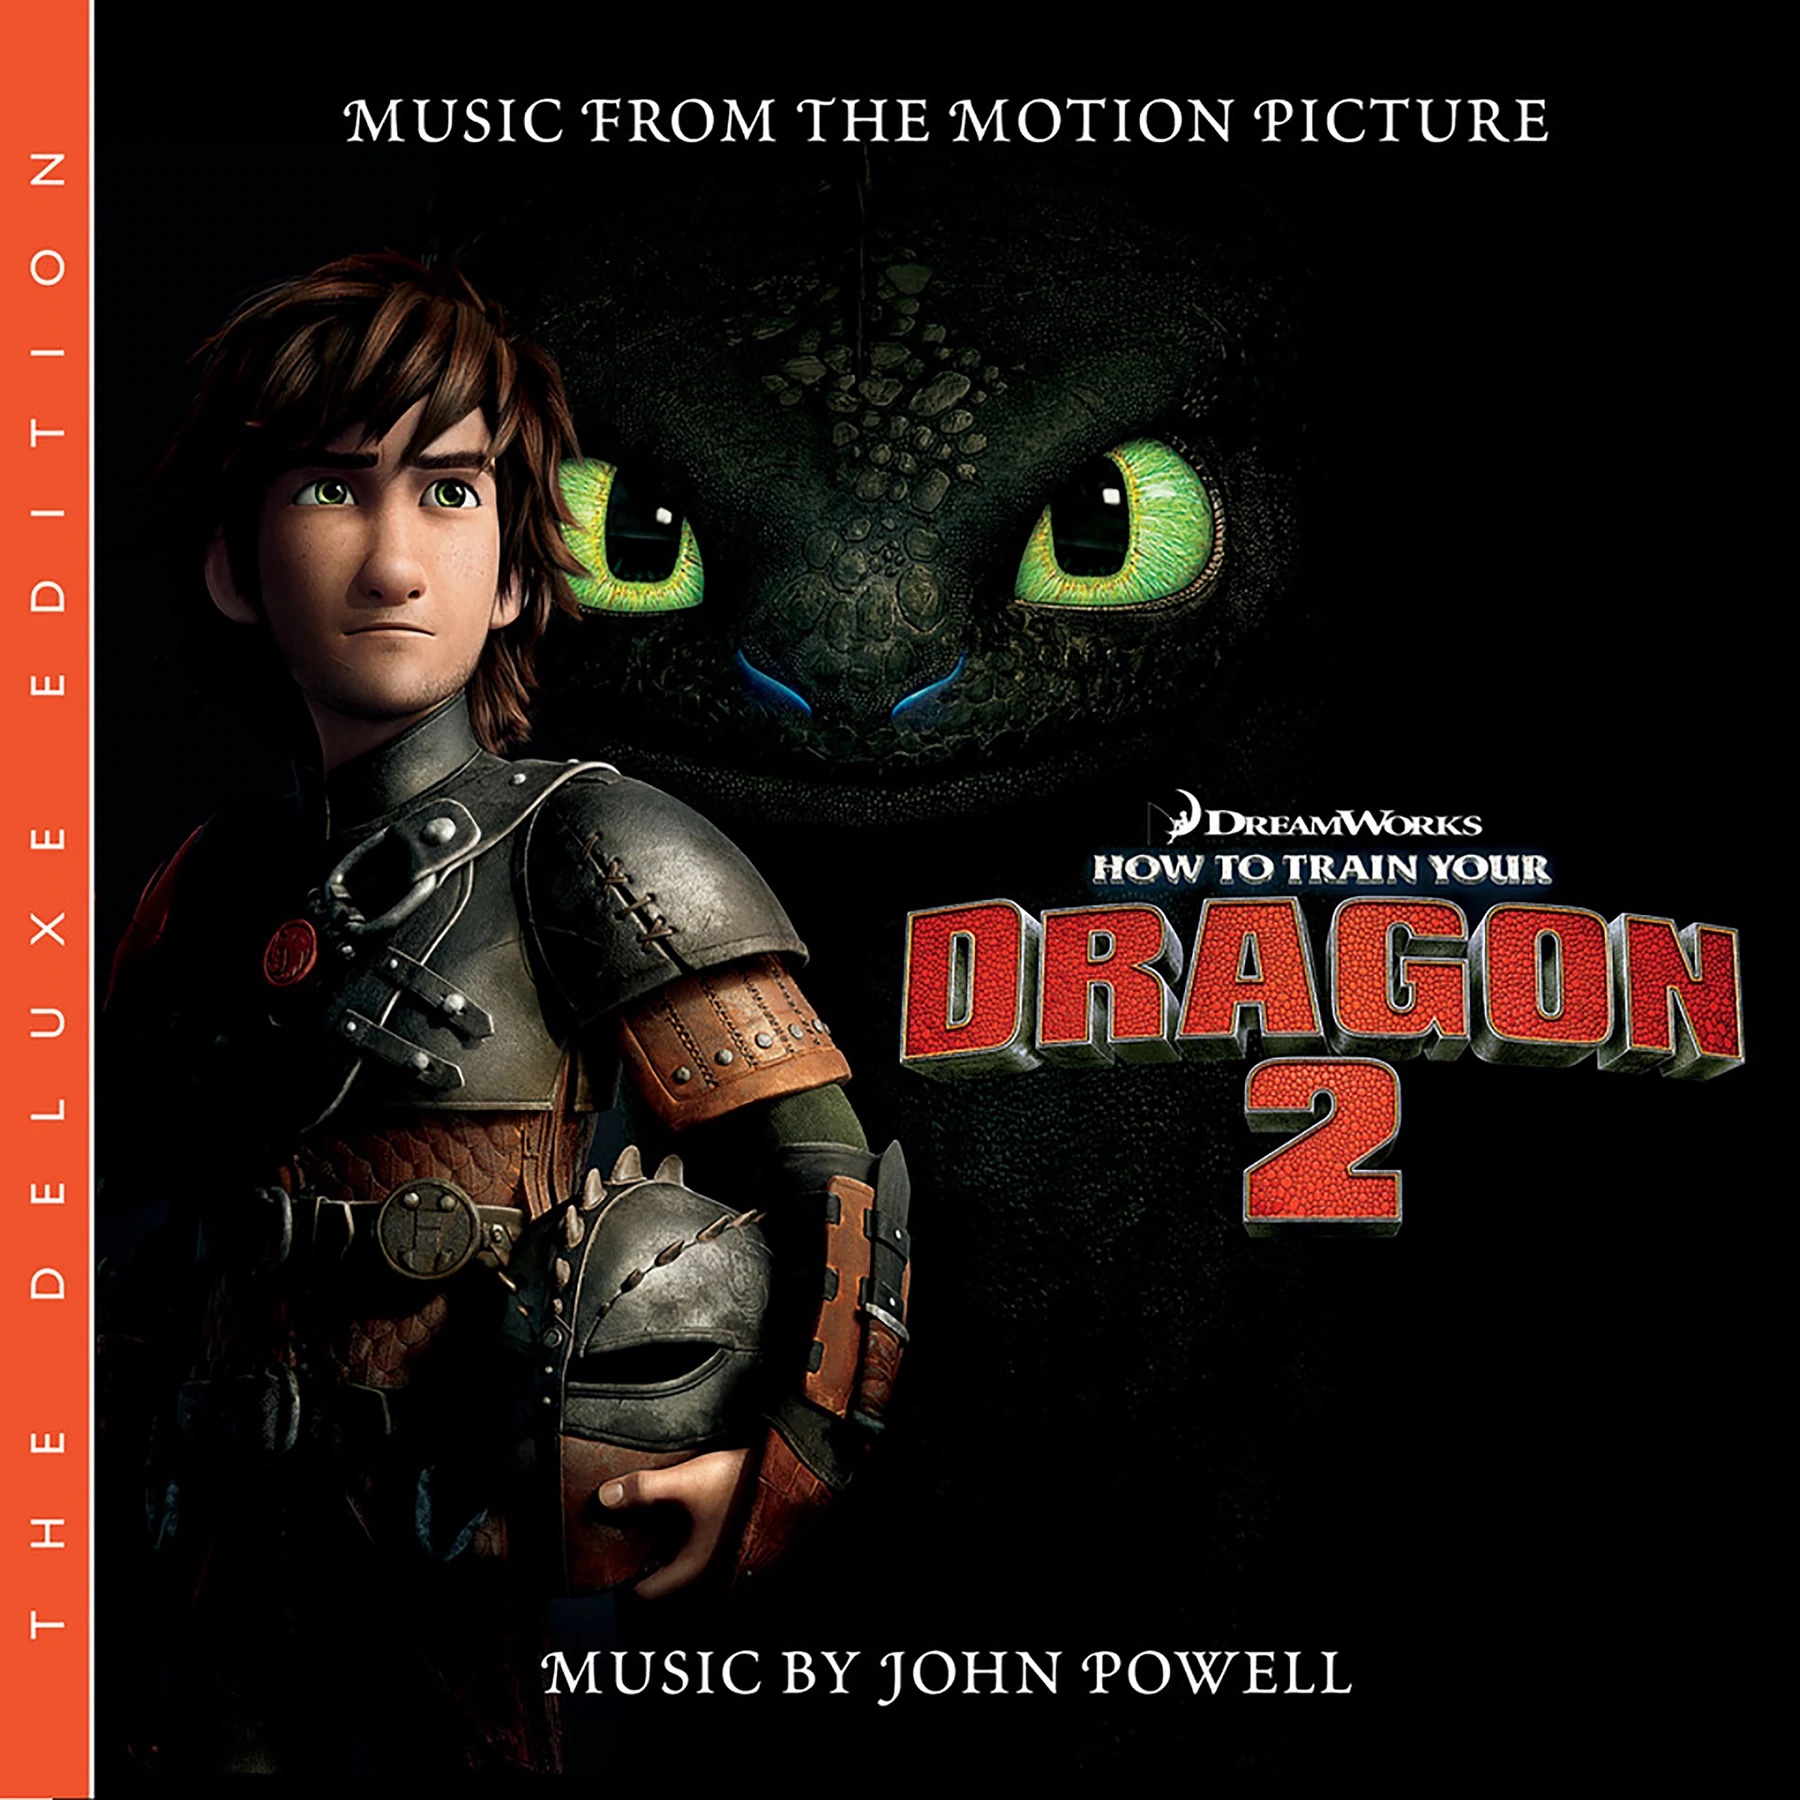 How To Train Your Dragon 2 Deluxe